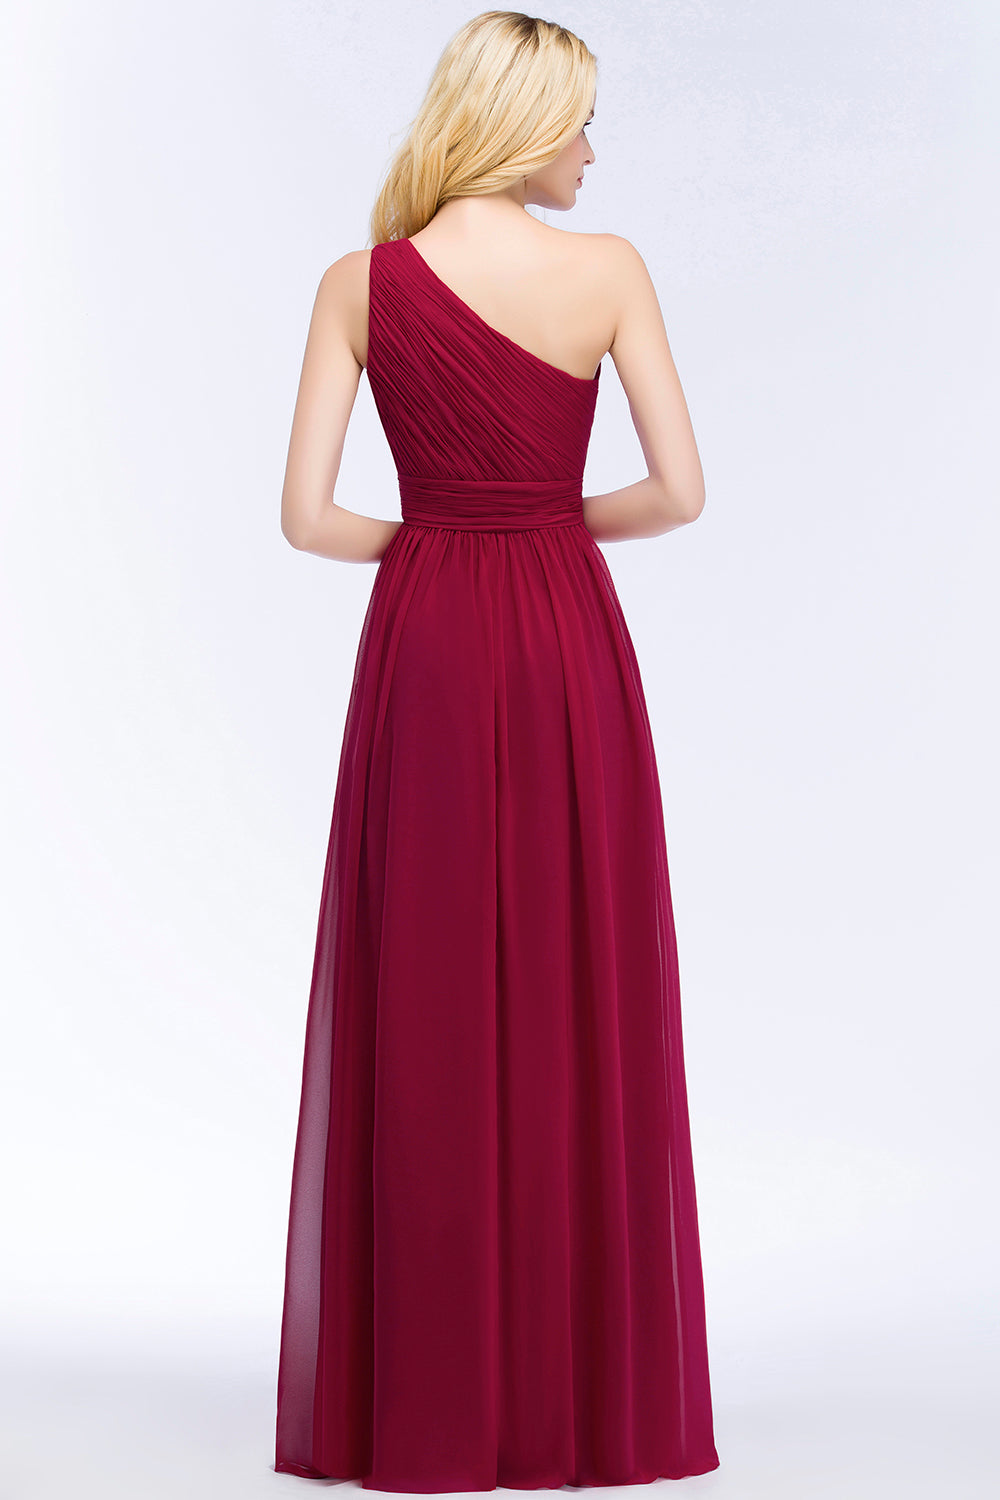 Load image into Gallery viewer, Chic One-shoulder Sleeveless Burgundy Chiffon Bridesmaid Dresses Online-27dress
